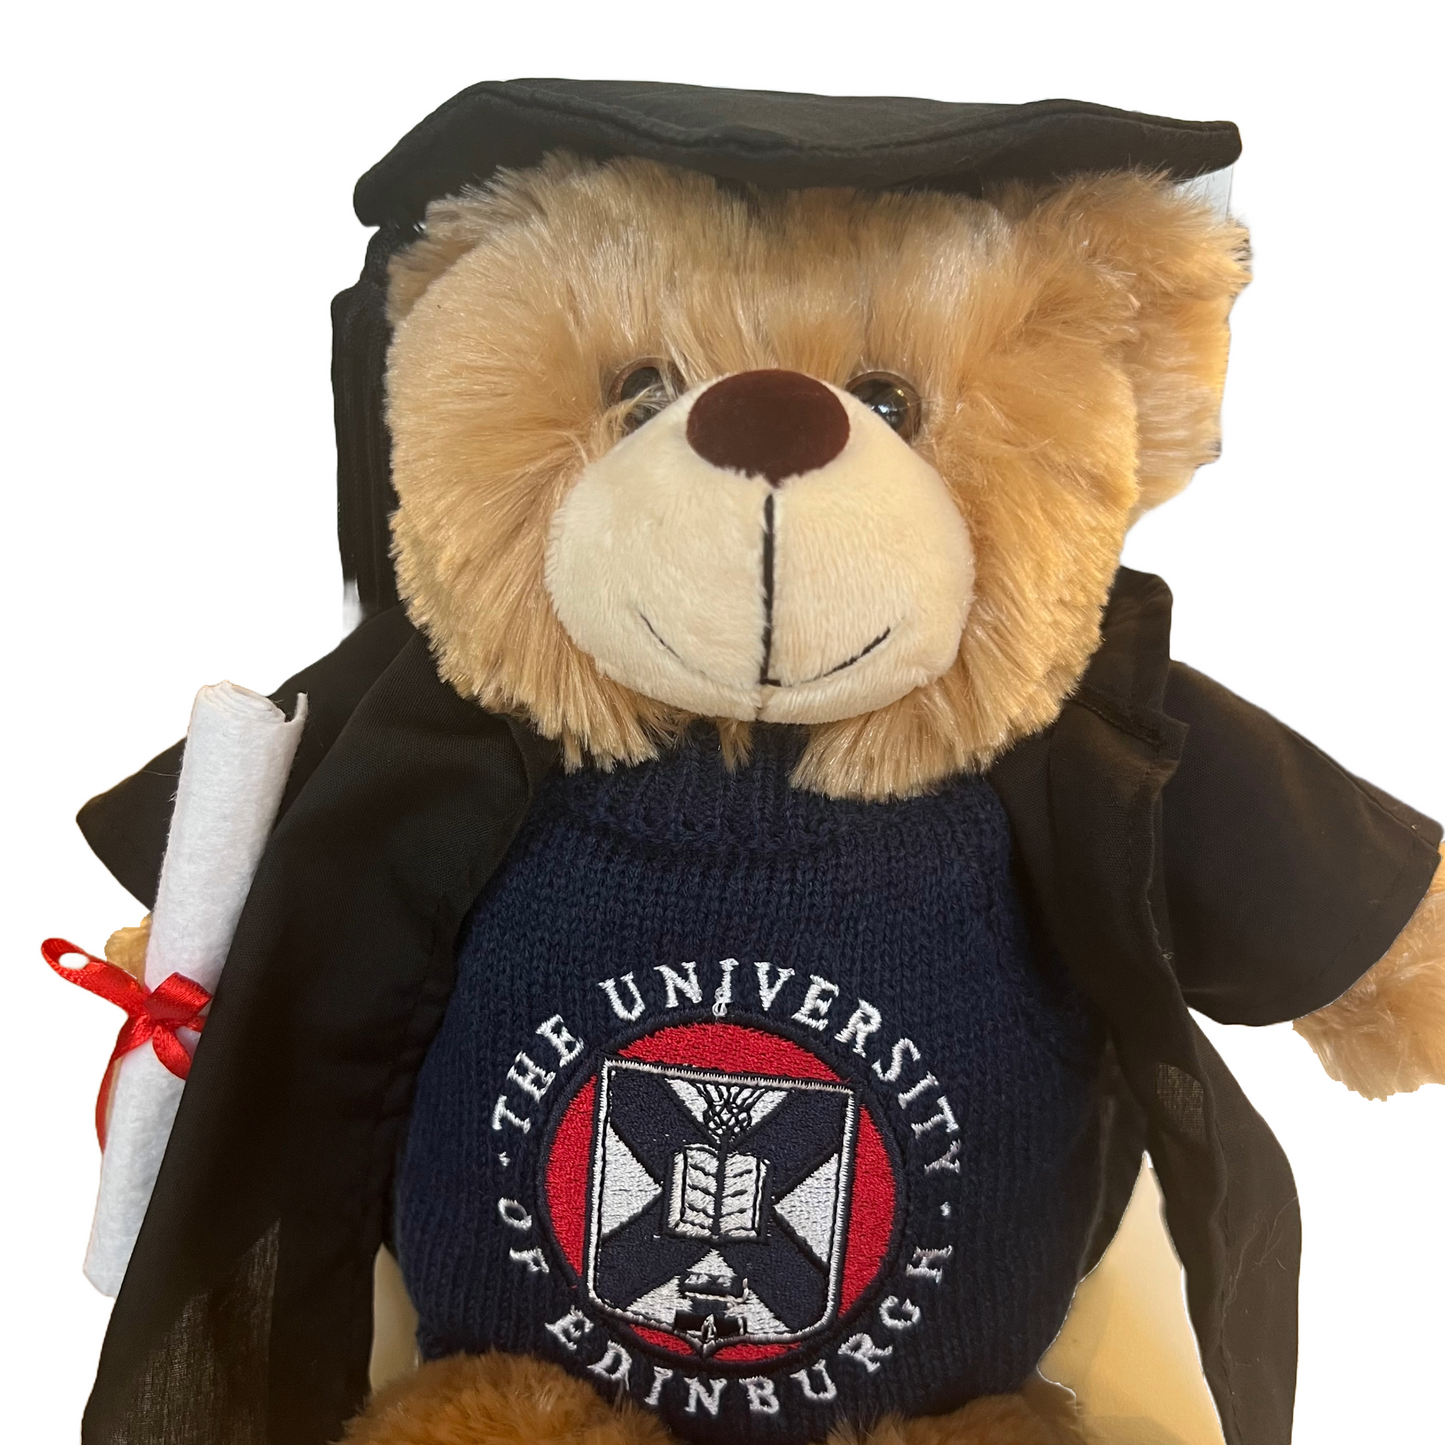 Brown teddy bear wearing knitted navy jumper with university crest embroidered, with graduation cap, gown and scroll